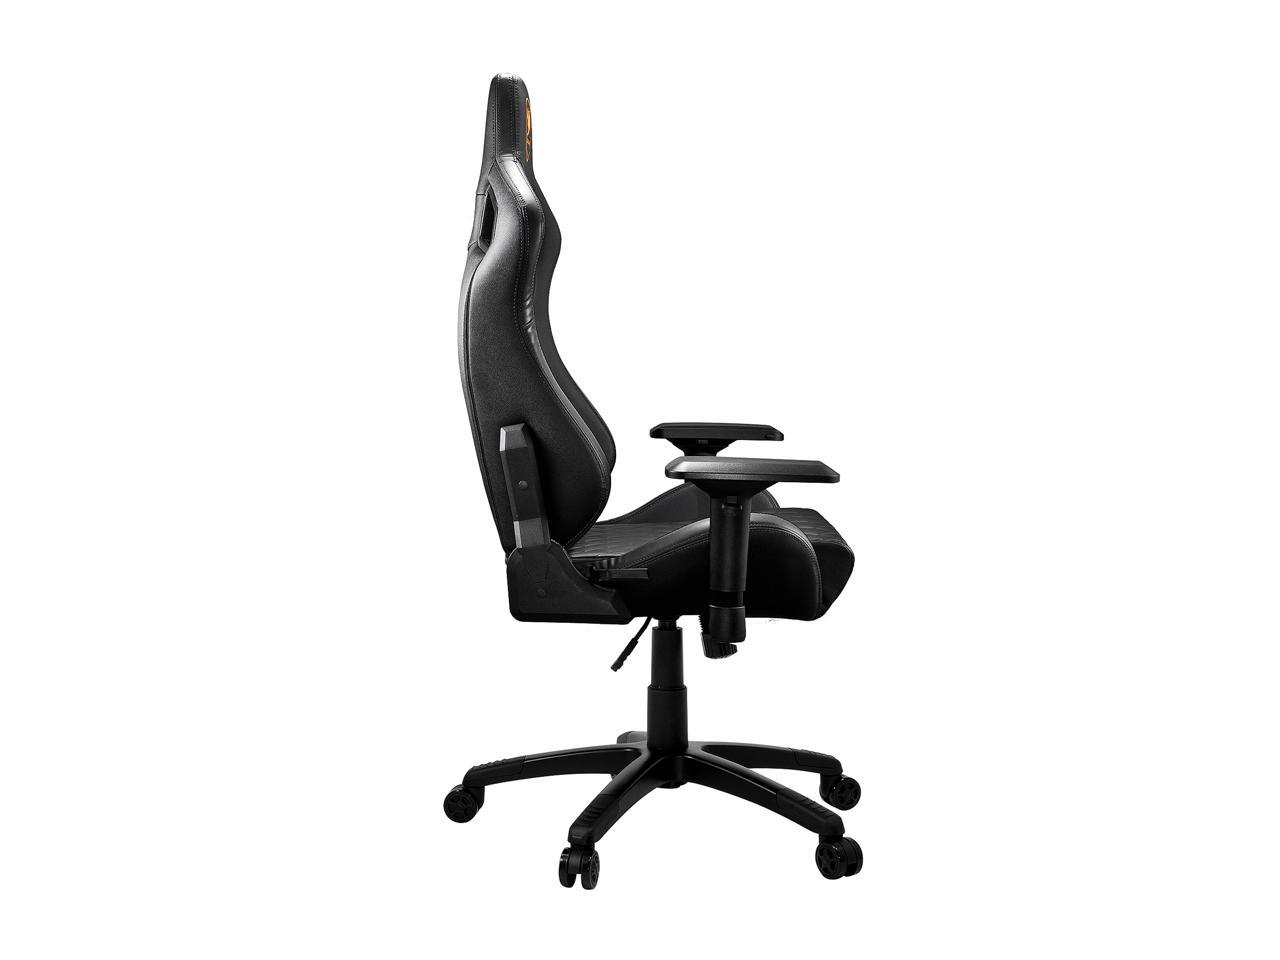 Cougar Armor S (Black) Luxury Gaming Chair With Breathable Premium Pvc Leather And Body-Embracing High Back Design